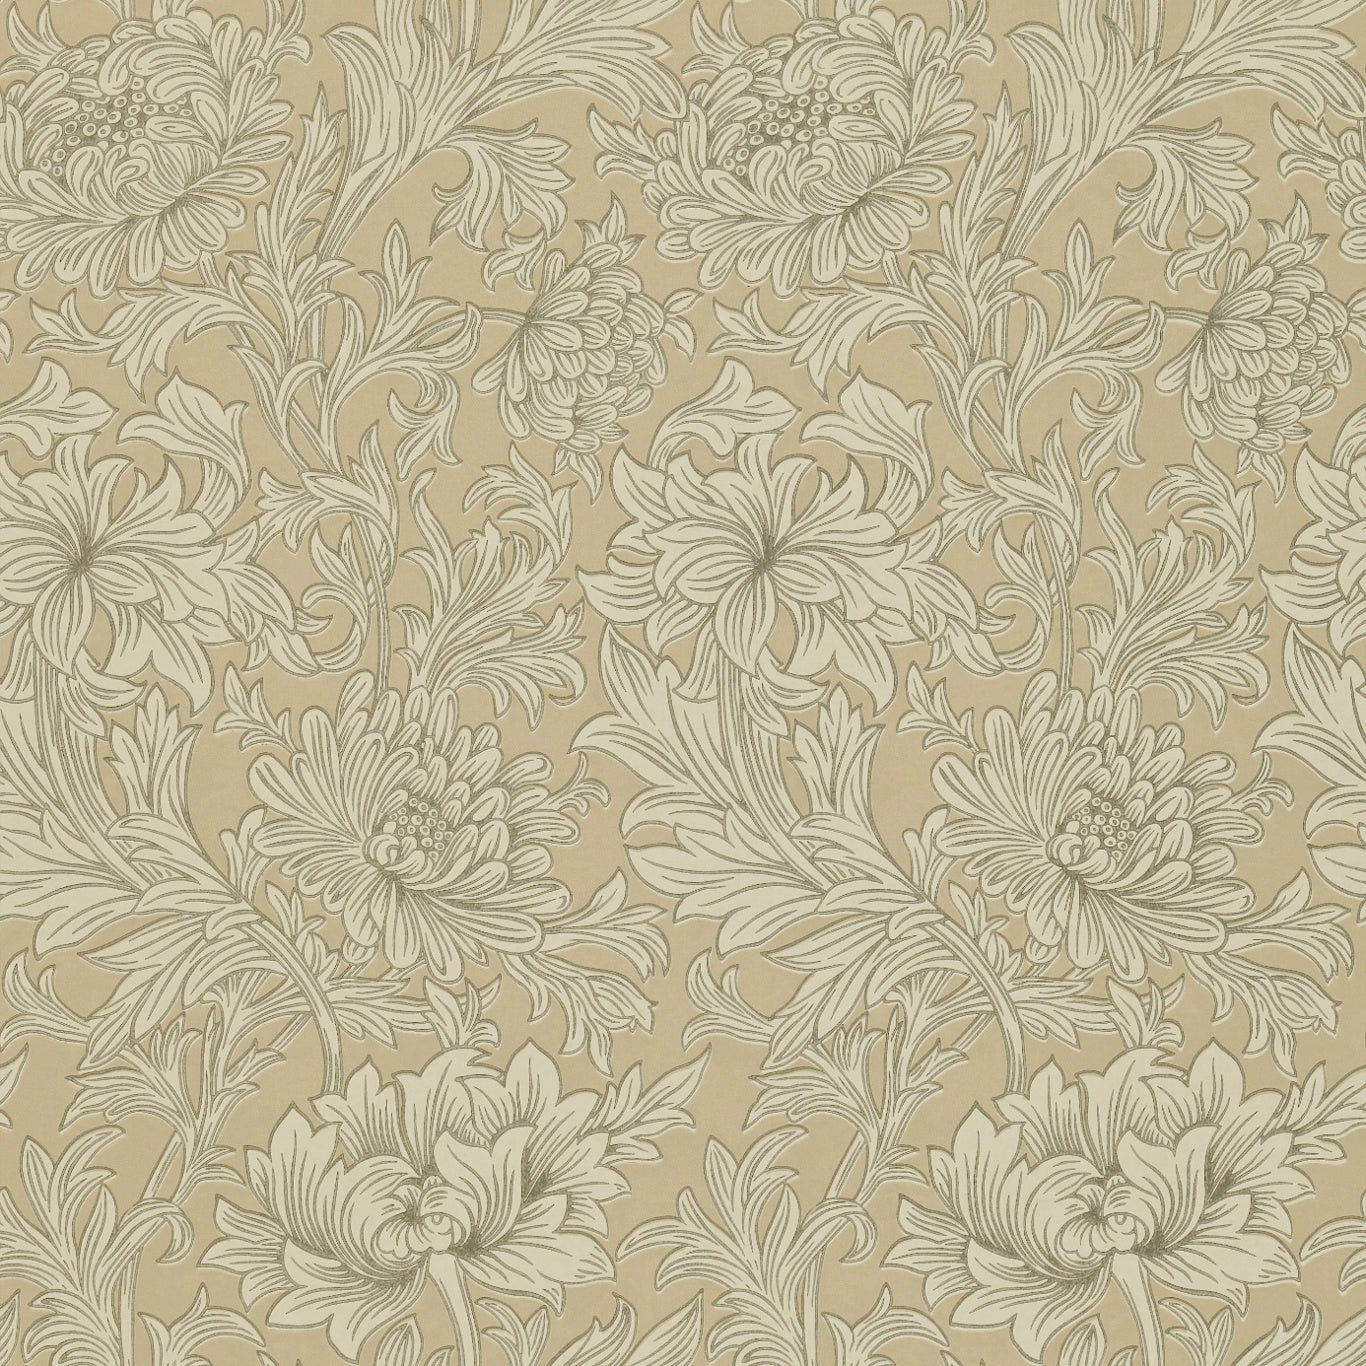 Chrysanthemum Toile Ivory/Gold Wallpaper DMOWCH103 by Morris & Co